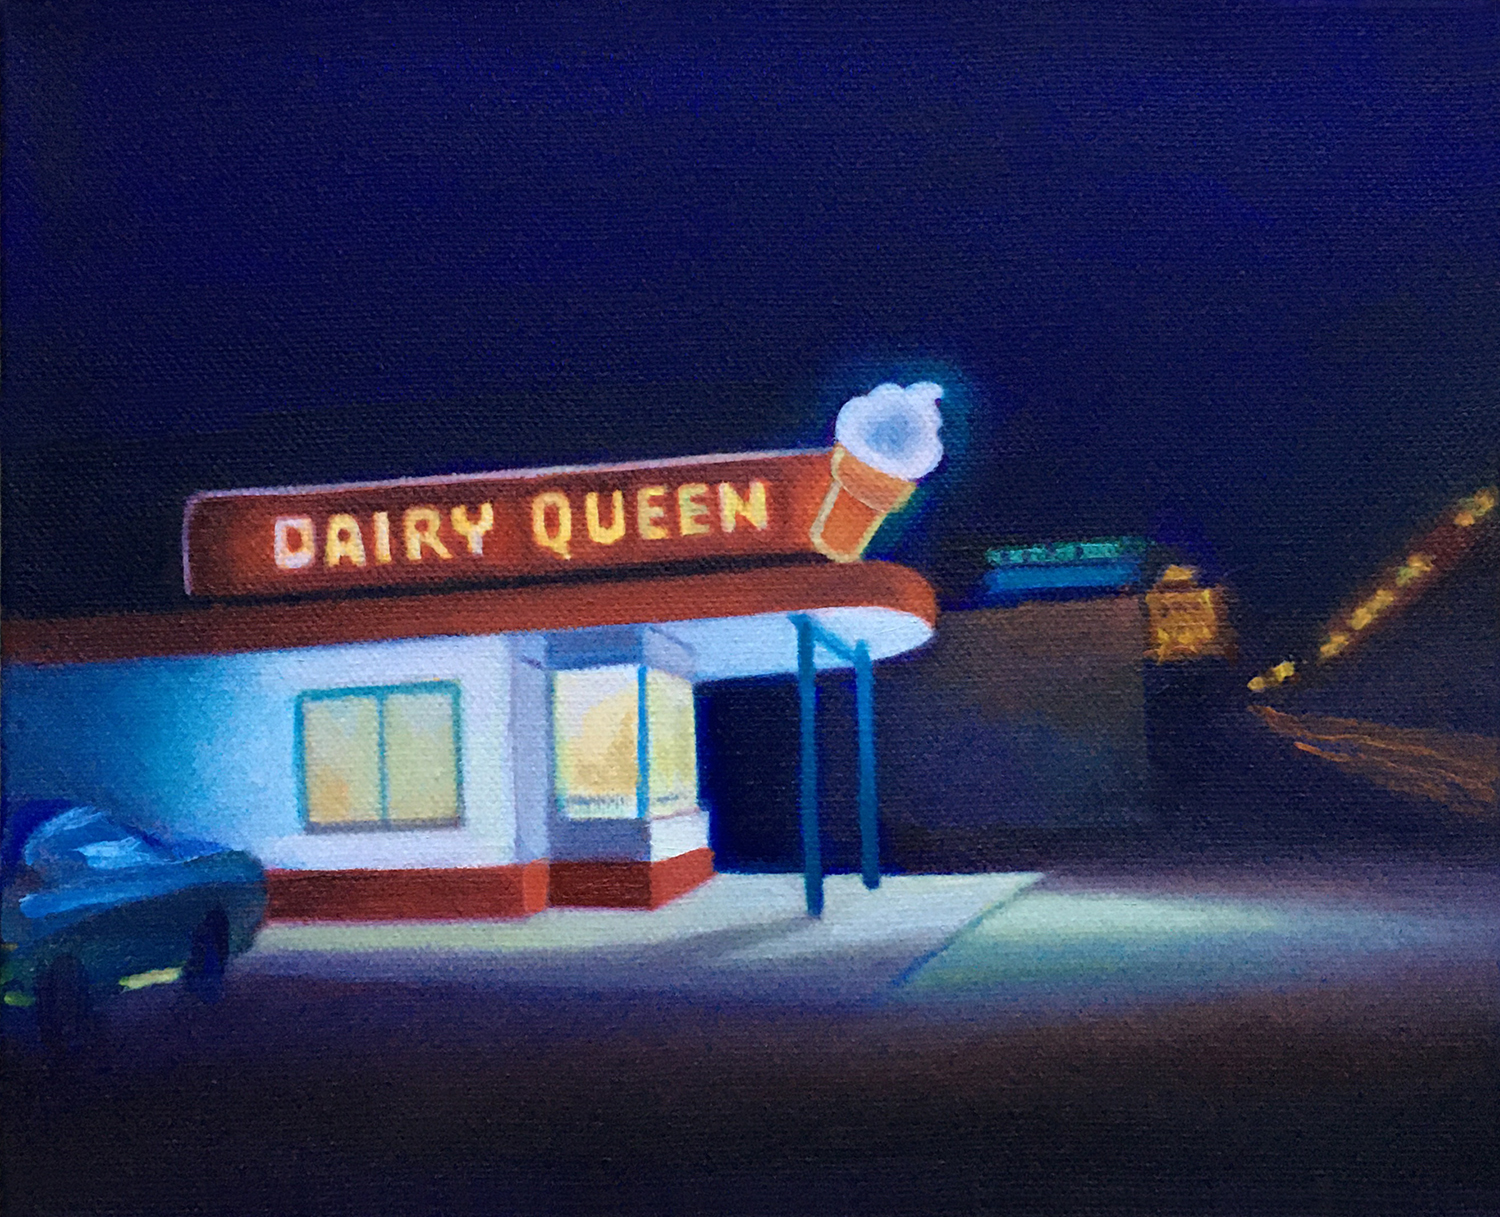 Nocturnal Delight by David Davenport 8X10 oil on canvas at Craven Allen Gallery   800